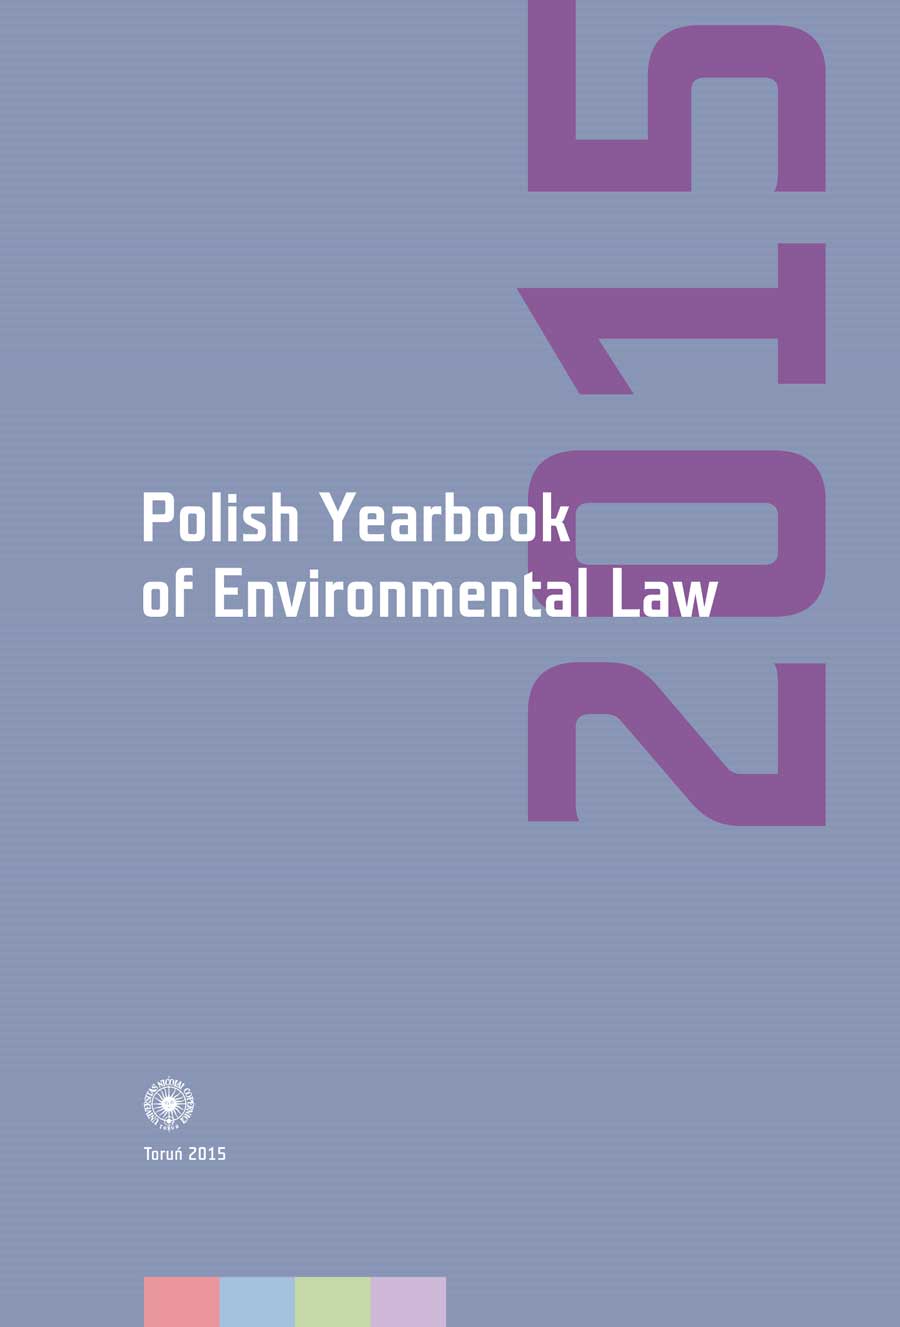 Polish Yearbook of Environmental Law